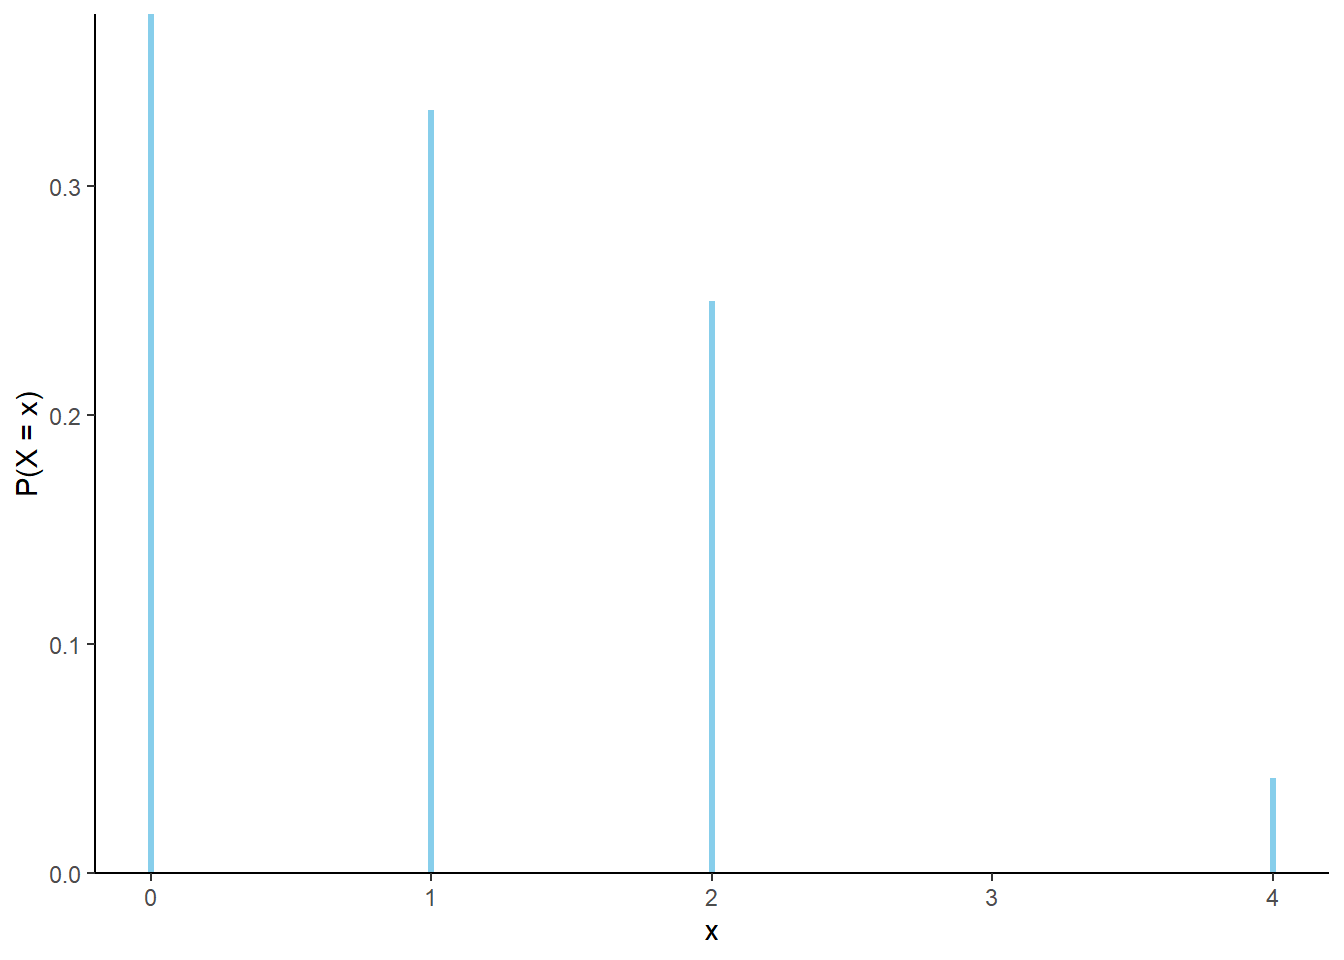 Distribution of \(X\), the number of matches in the matching problem with \(n=4\) and uniformly random placement of objects in spots.